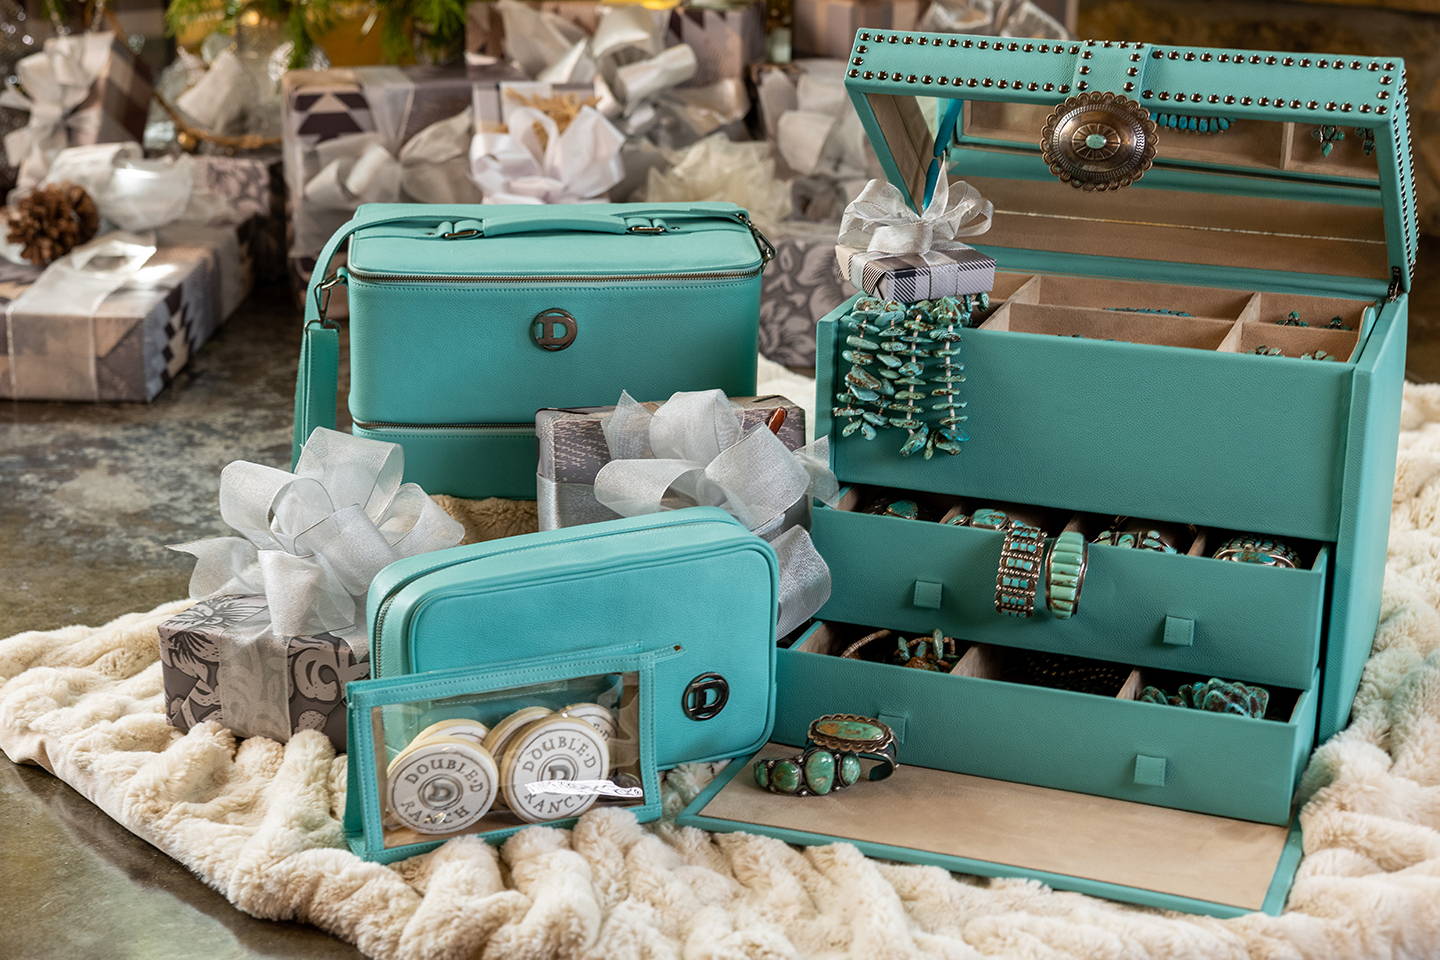 THIS JUST IN: NEW TURQUOISE TRAVEL SERIES